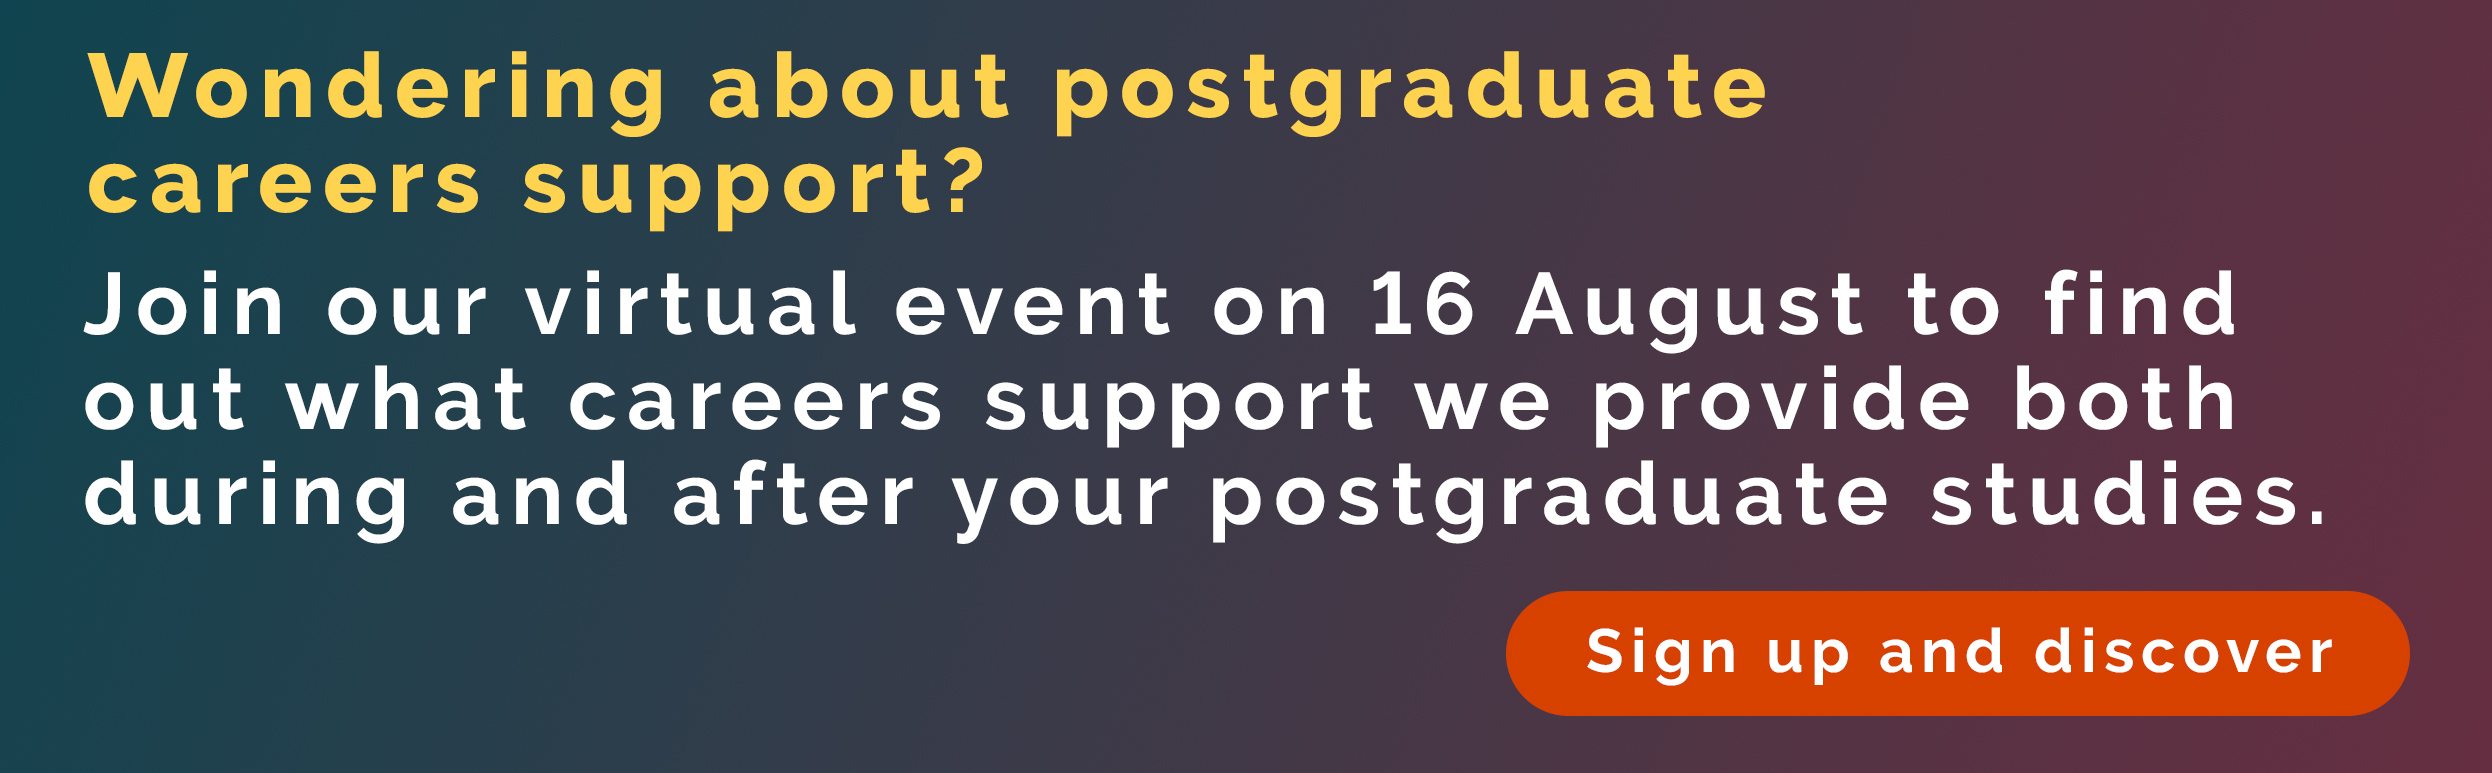 Join our virtual event on 16 August to find out what careers support we provide